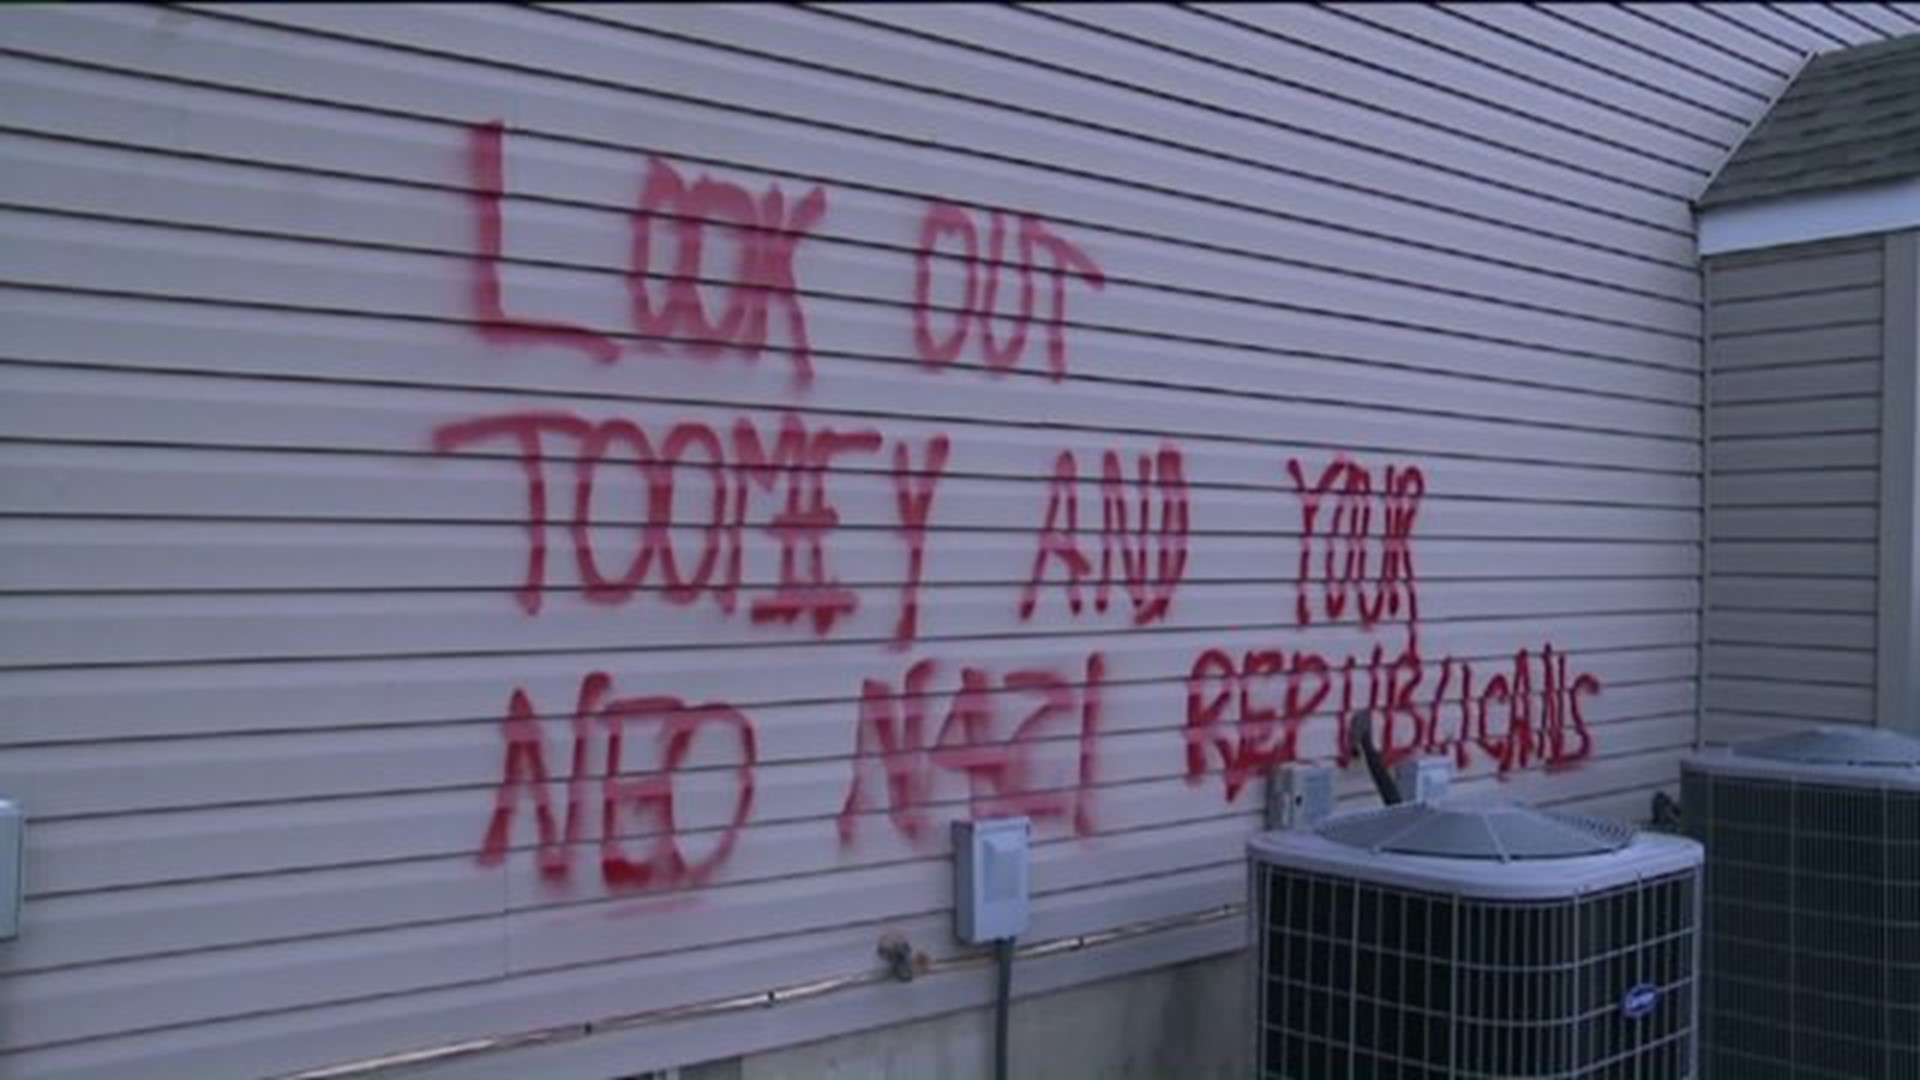 Senator Pat Toomey`s Neighbors Targeted by Political Vandals